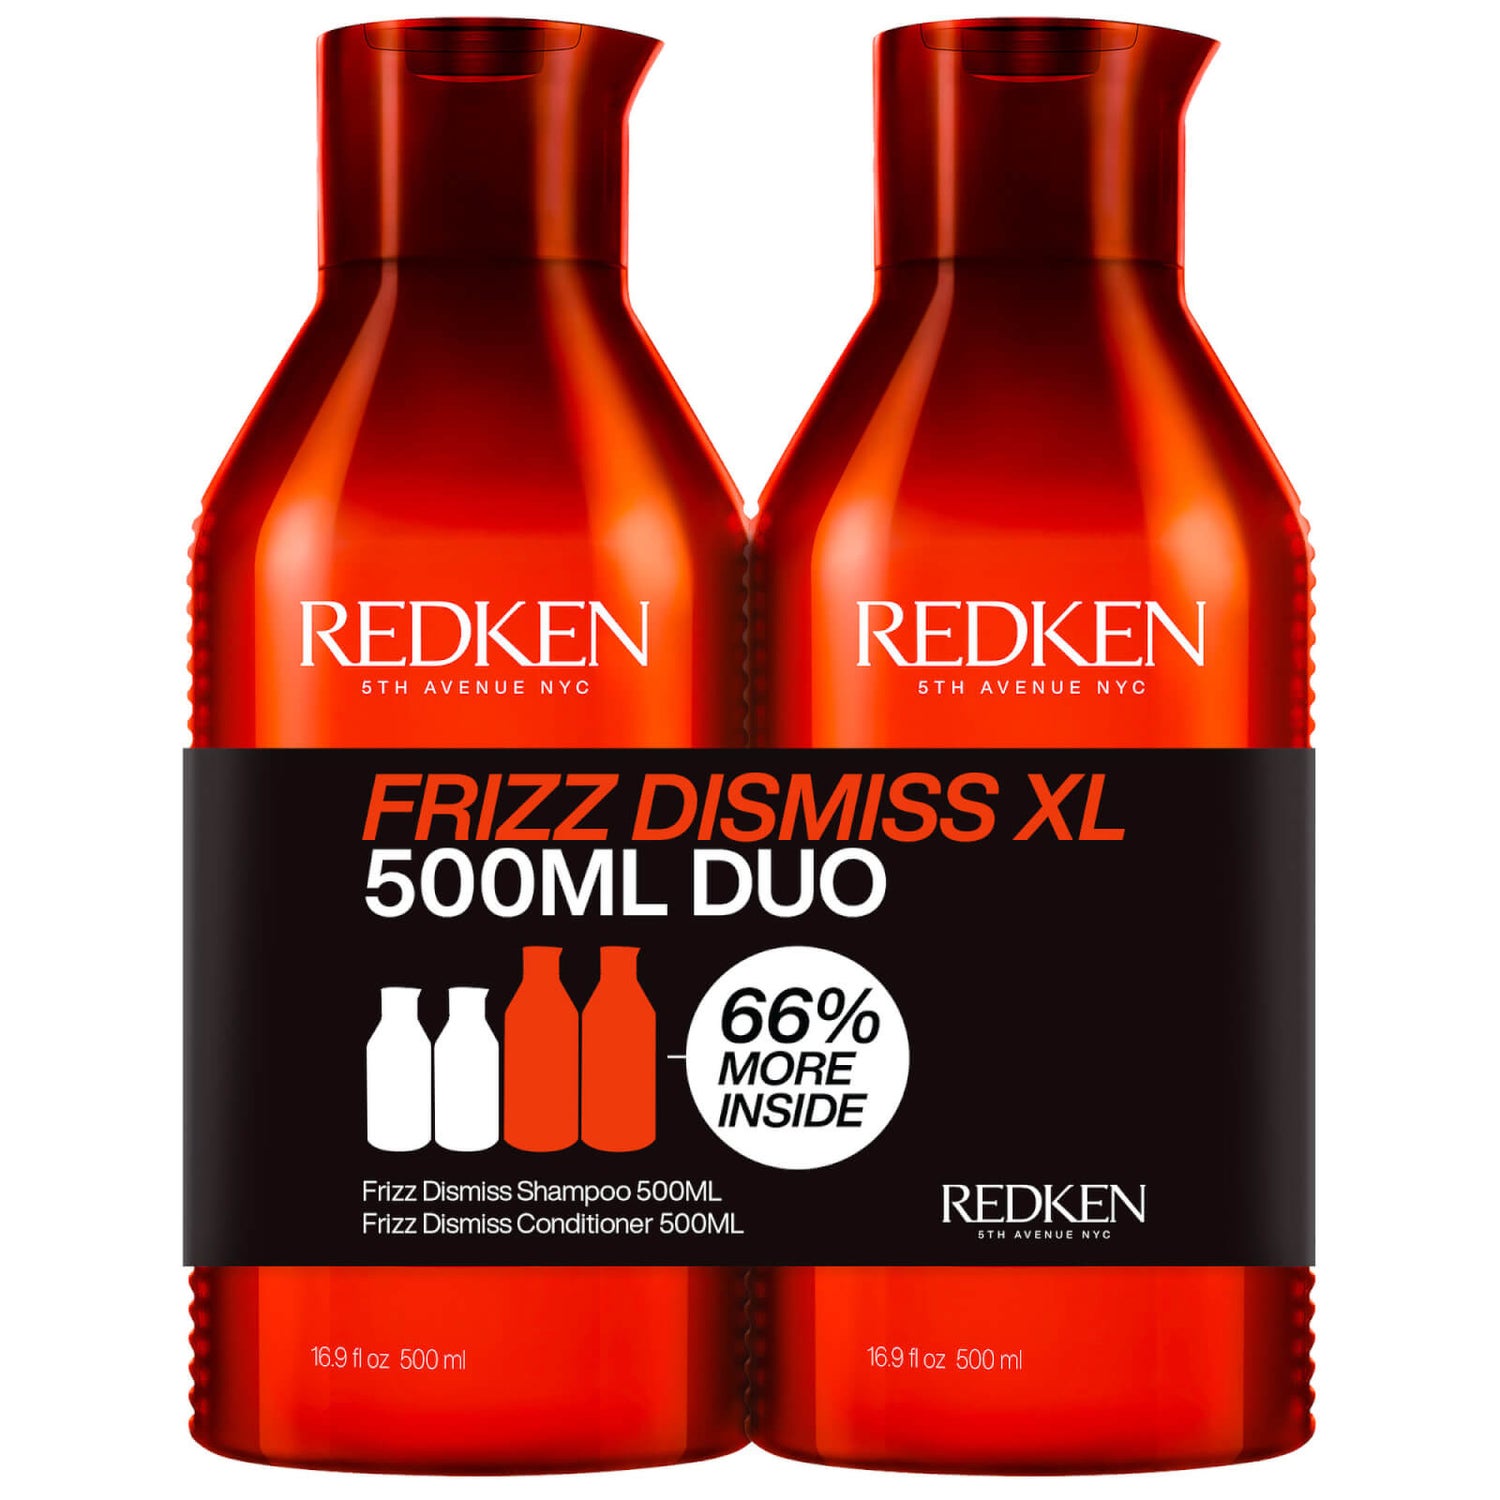 Redken Frizz Dismiss Shampoo and Conditioner Duo (2 x 500ml)